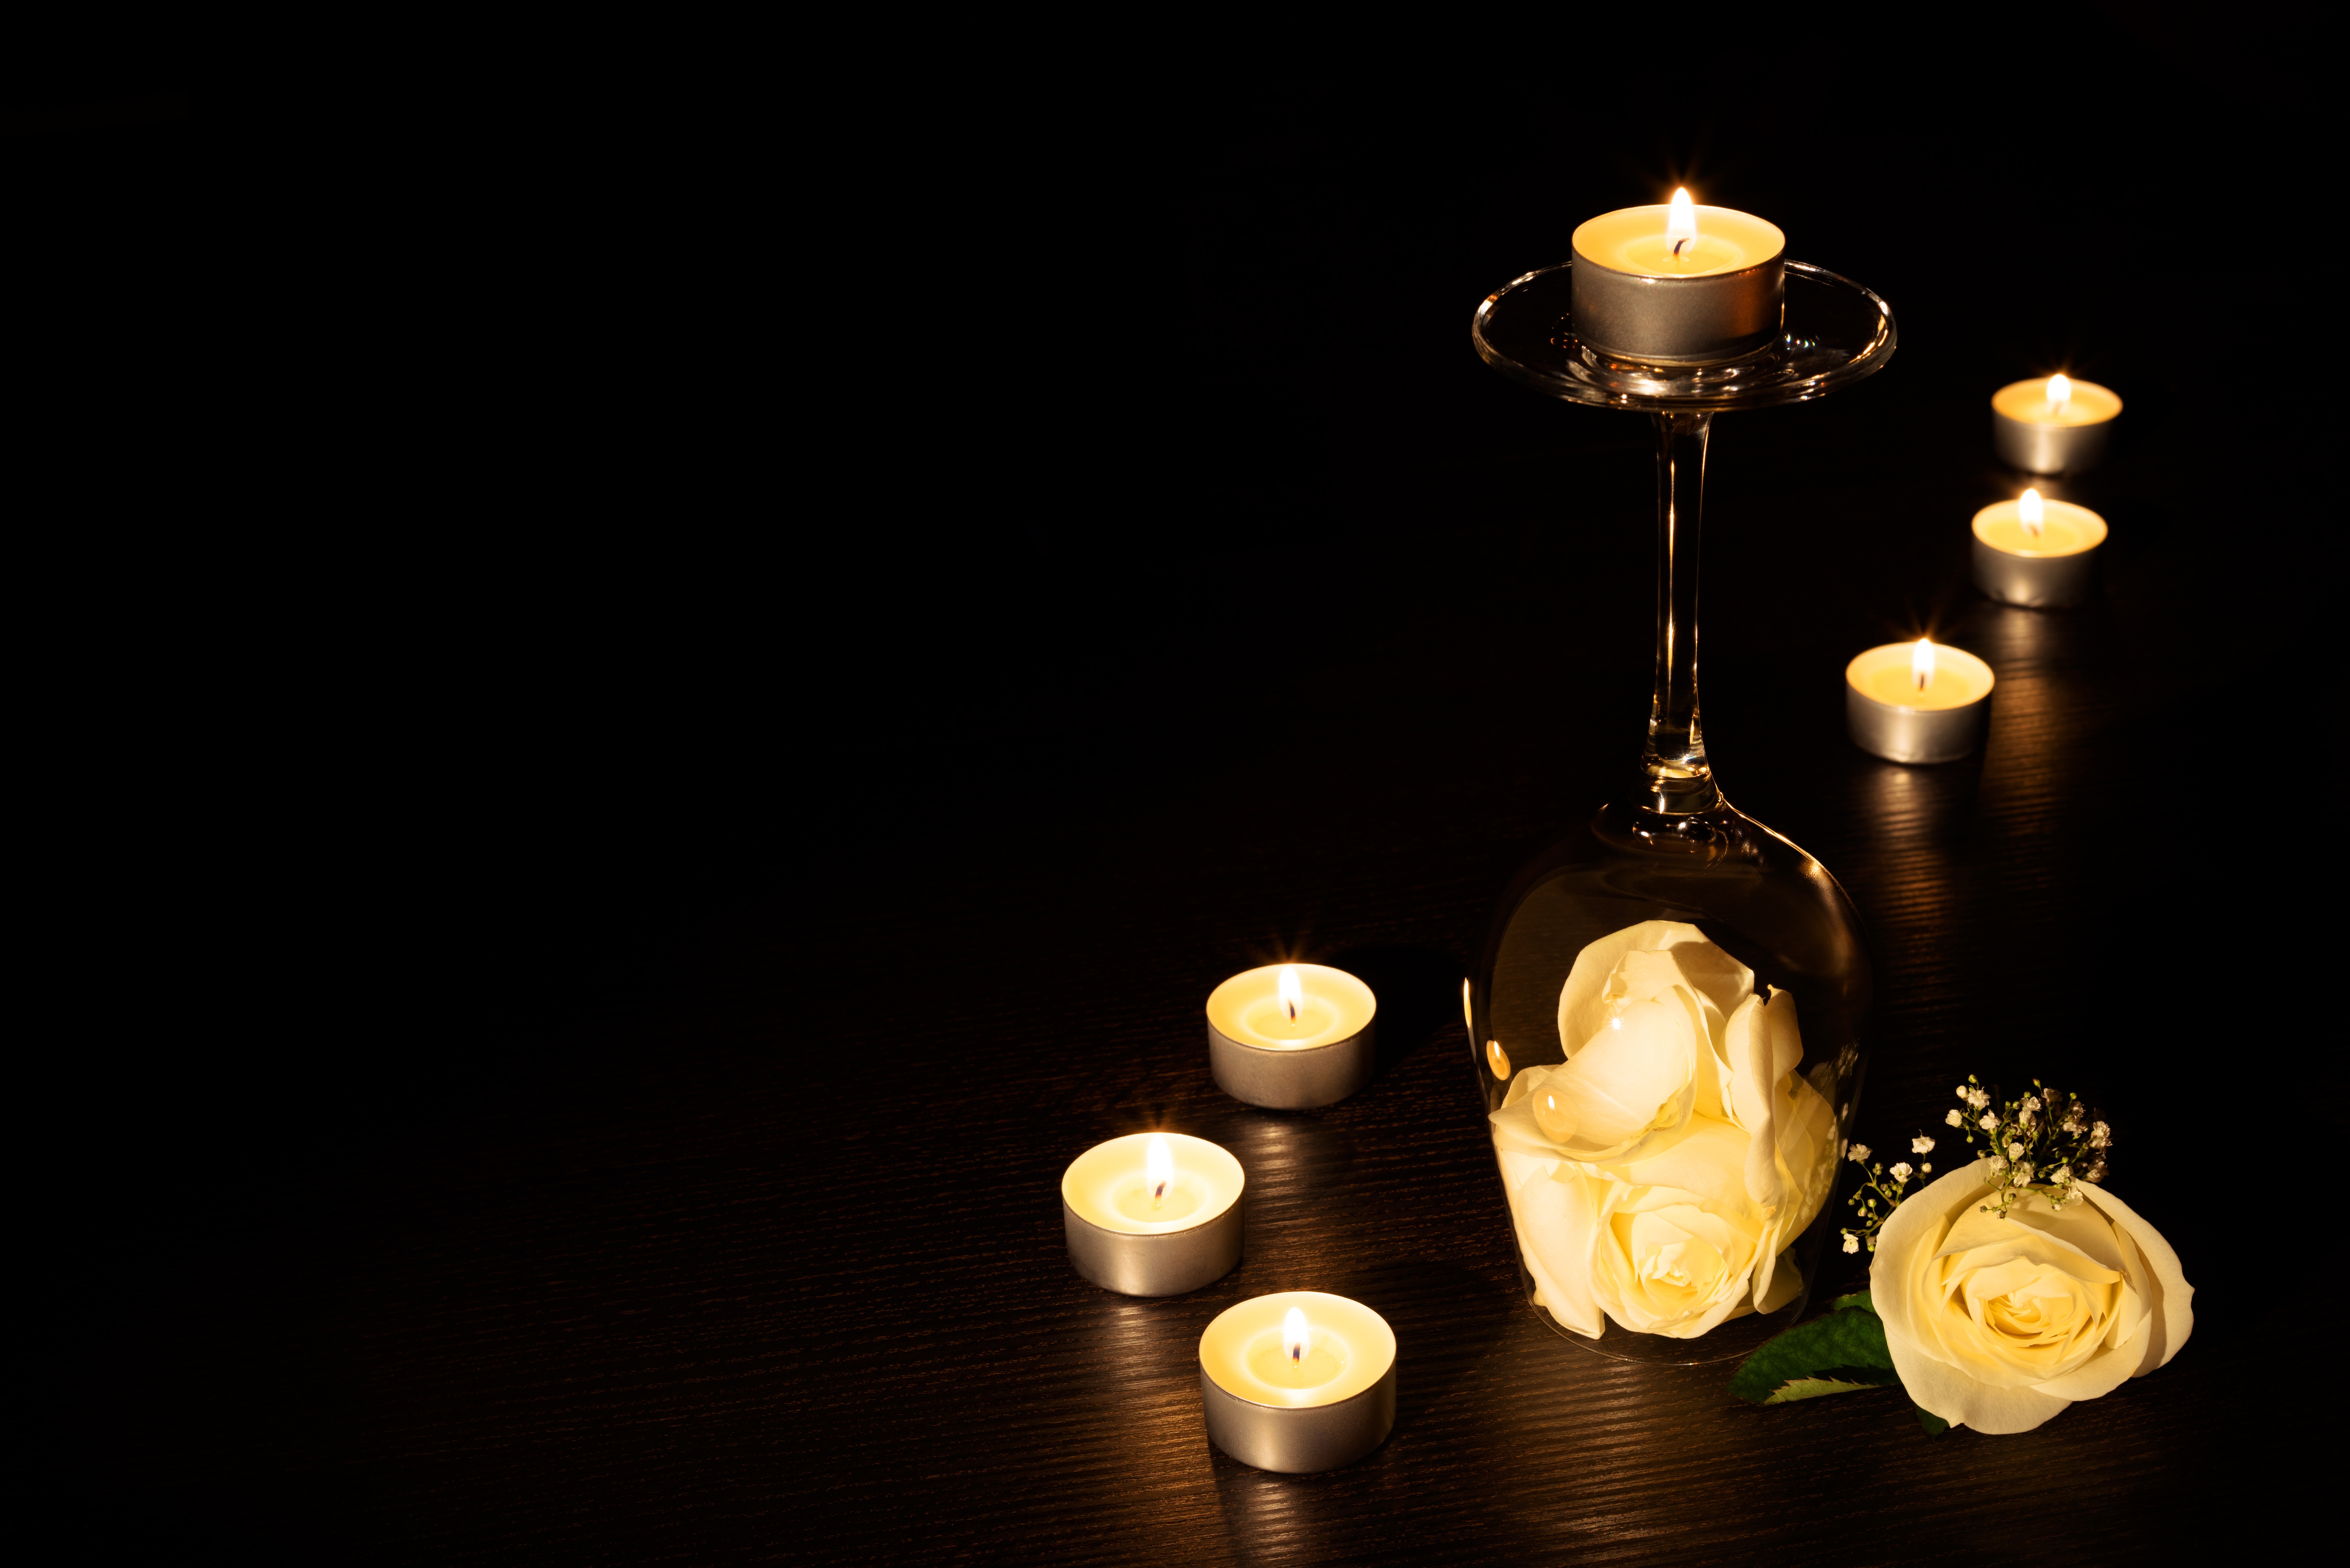 photography, still life, candle, flower, glass, light, rose, yellow rose